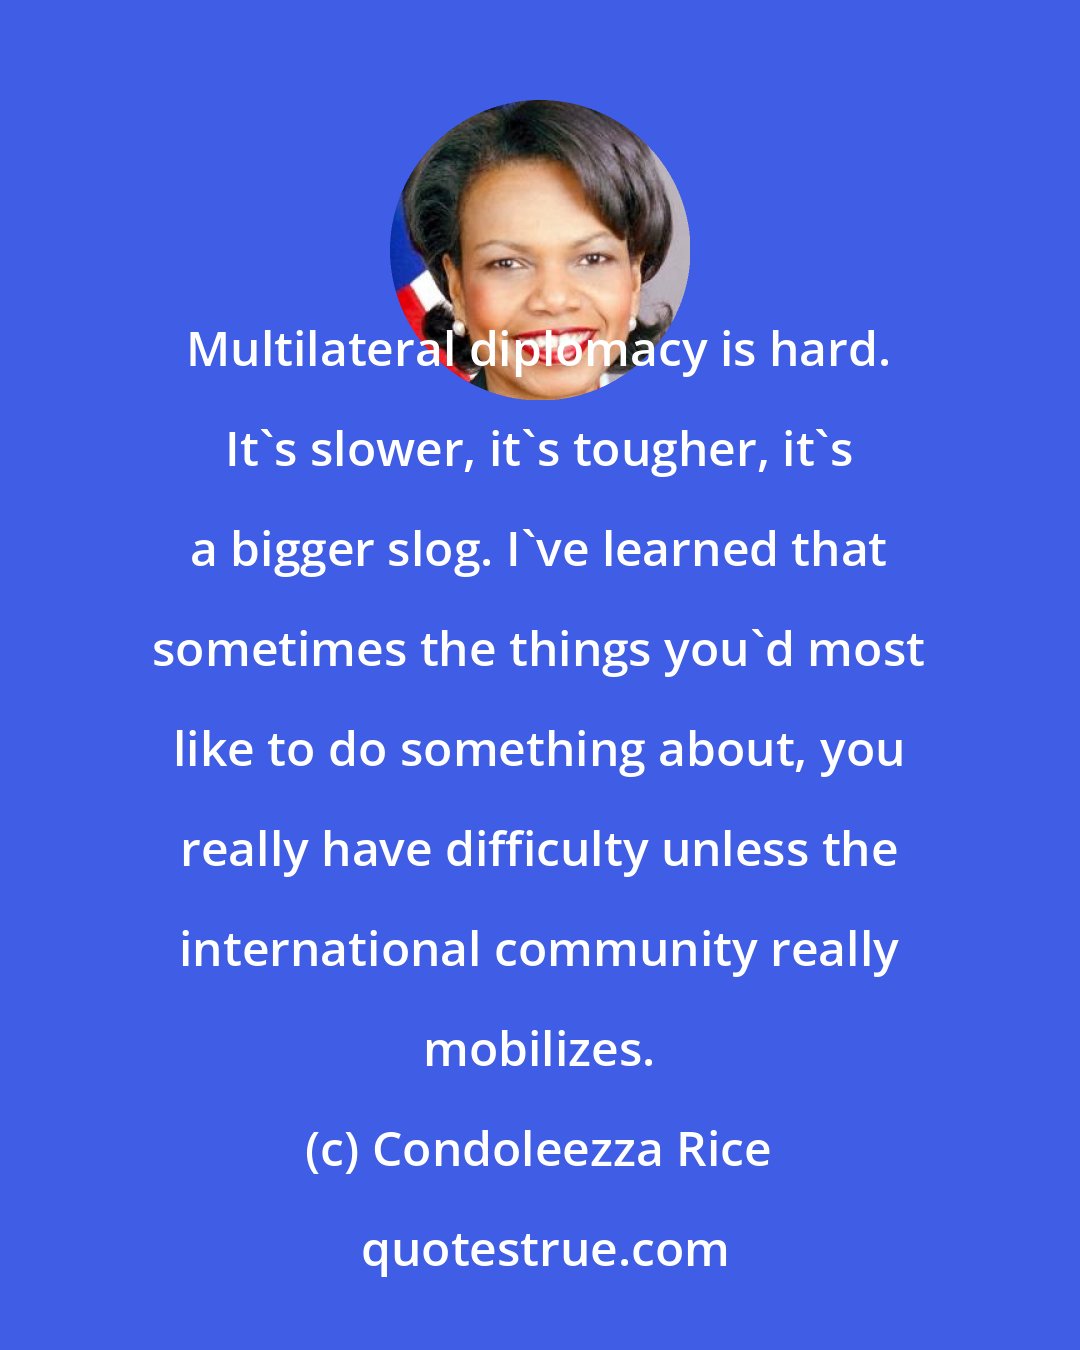 Condoleezza Rice: Multilateral diplomacy is hard. It's slower, it's tougher, it's a bigger slog. I've learned that sometimes the things you'd most like to do something about, you really have difficulty unless the international community really mobilizes.